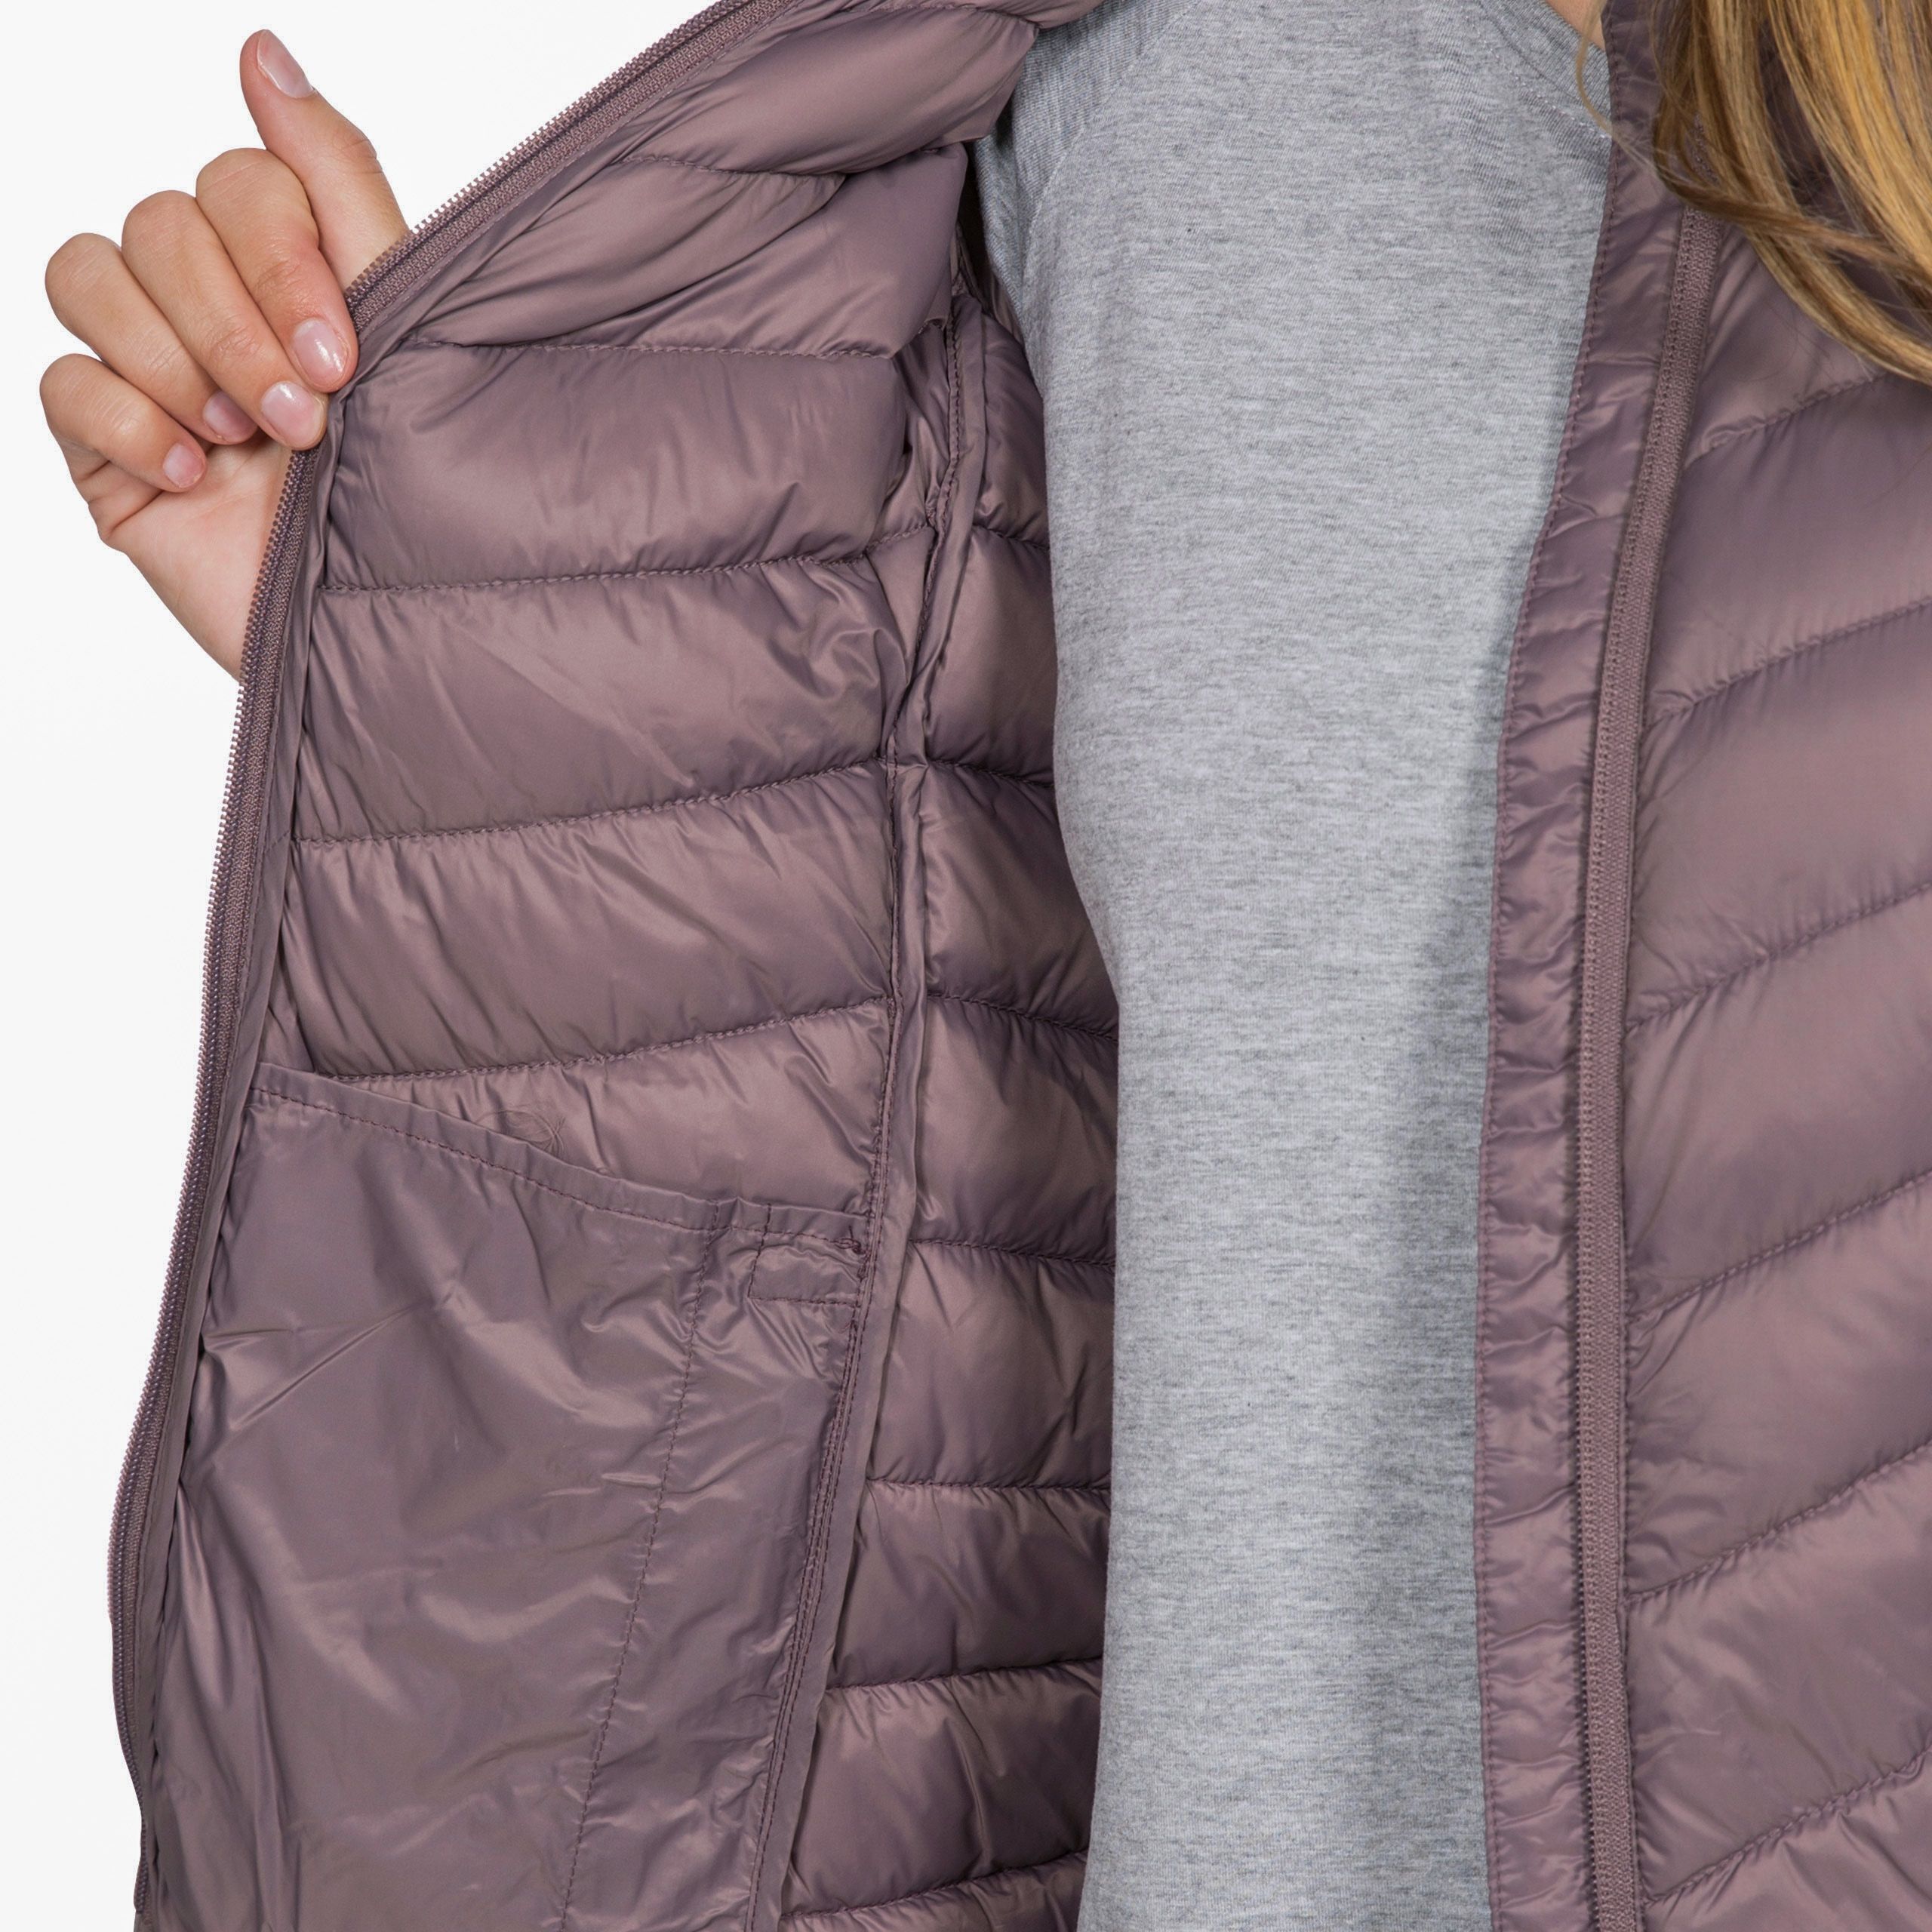 Ultra lightweight jacket. 2 lower zipped pockets. Low profile front zip. Matching binding at hem and cuffs. Stuff sack in pocket. Shell: 100% Polyamide, Lining: 100% Polyamide, Filling: 90% Down/10% Feather. Trespass Womens Chest Sizing (approx): XS/8 - 32in/81cm, S/10 - 34in/86cm, M/12 - 36in/91.4cm, L/14 - 38in/96.5cm, XL/16 - 40in/101.5cm, XXL/18 - 42in/106.5cm.